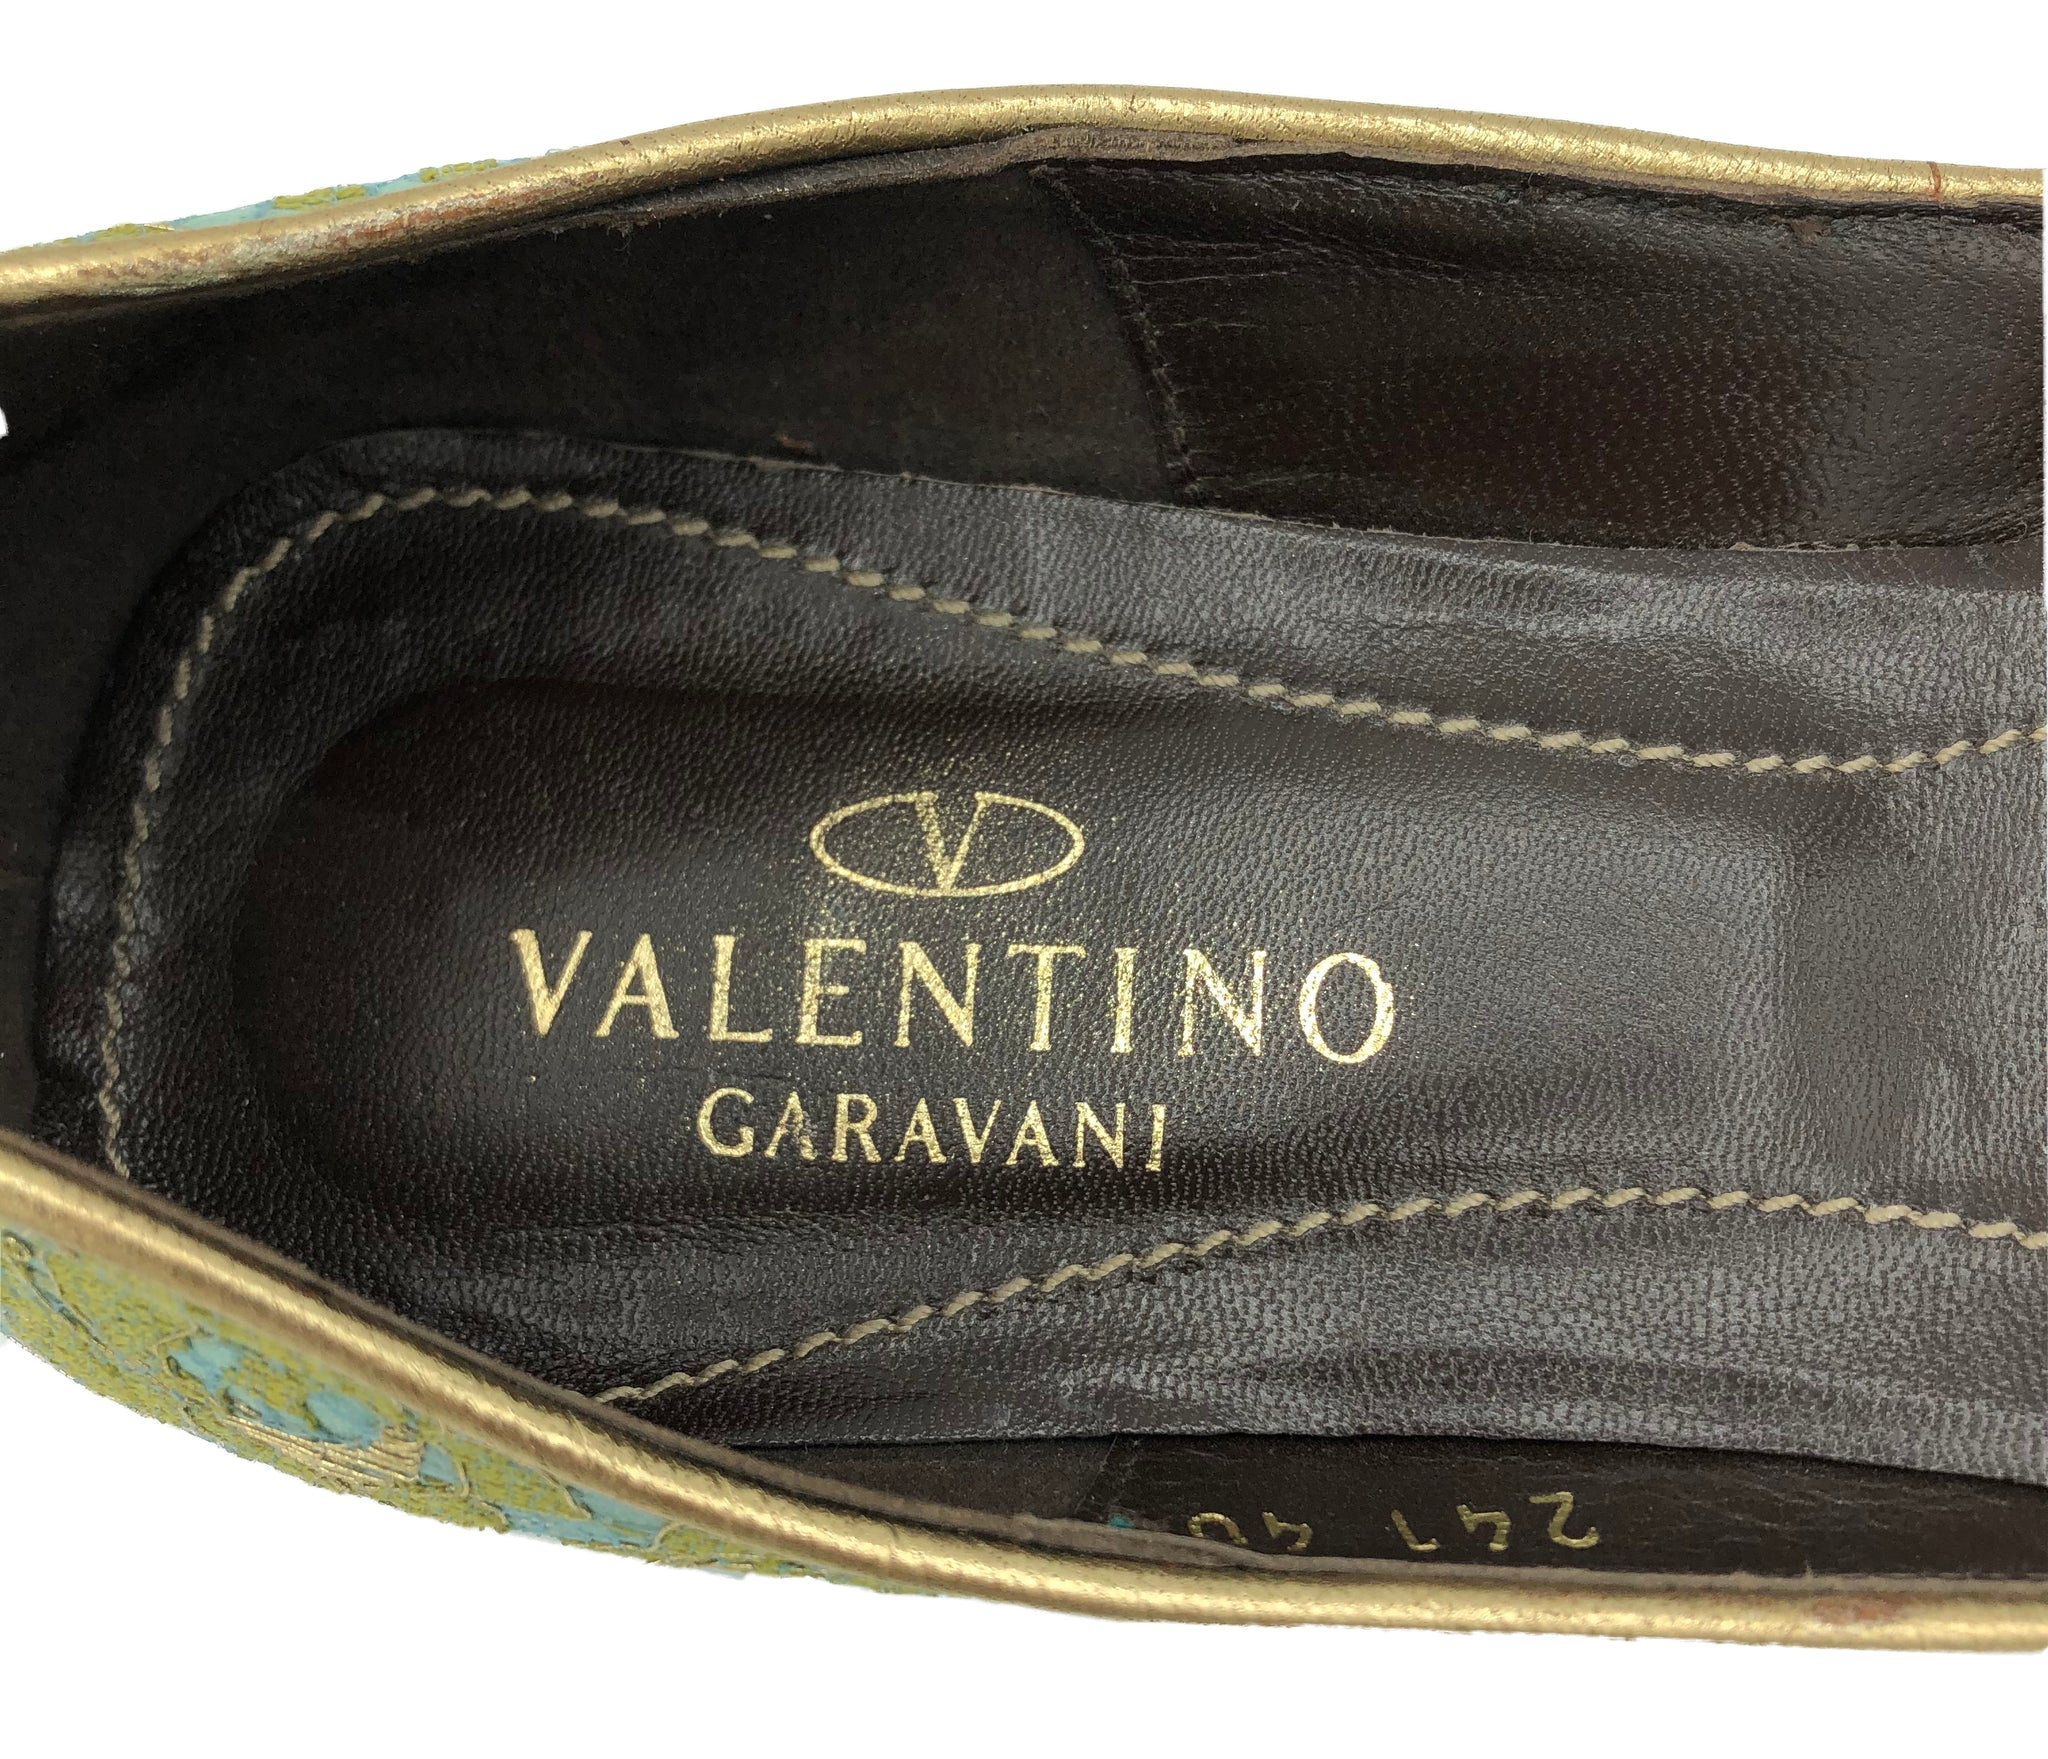 Valentino Contemporary Turquoise Satin Ballet Flats with Gold Lace Overlay 5 of 5